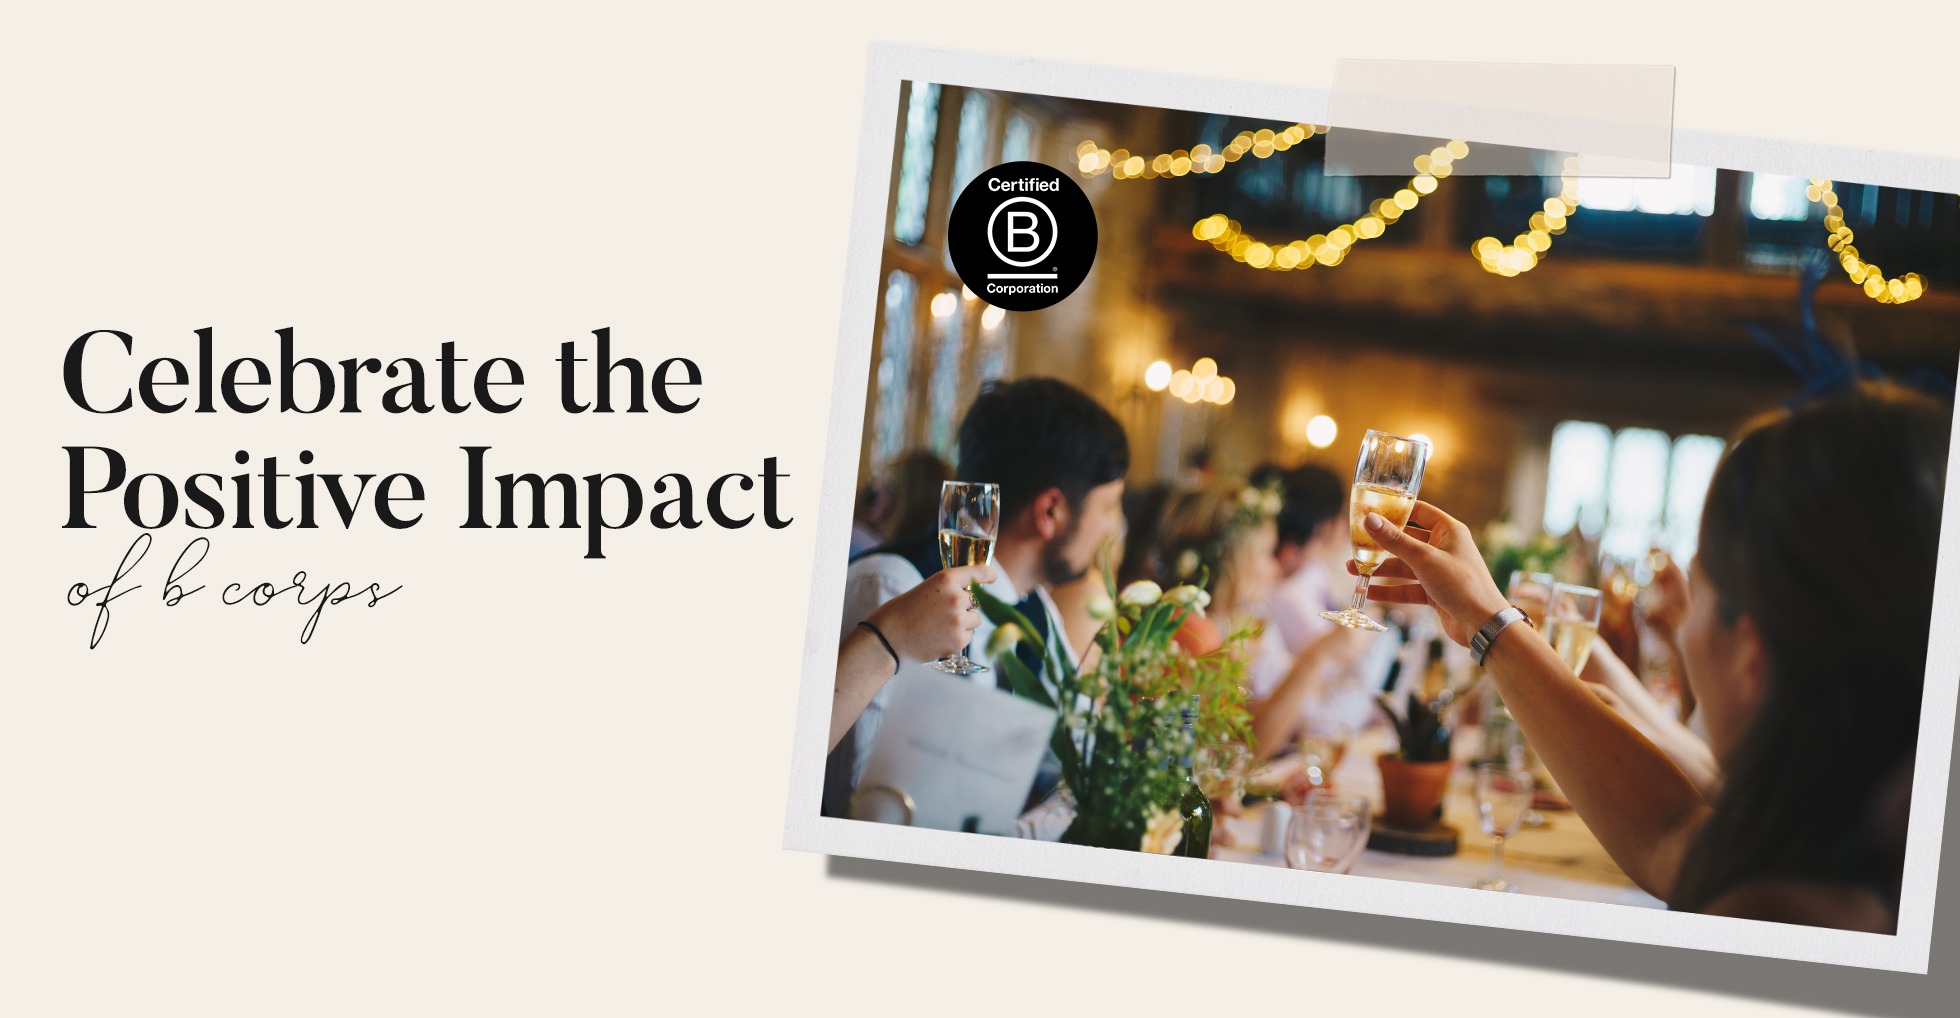 B Corp Month: How to Celebrate the Positive Impact of B Corps